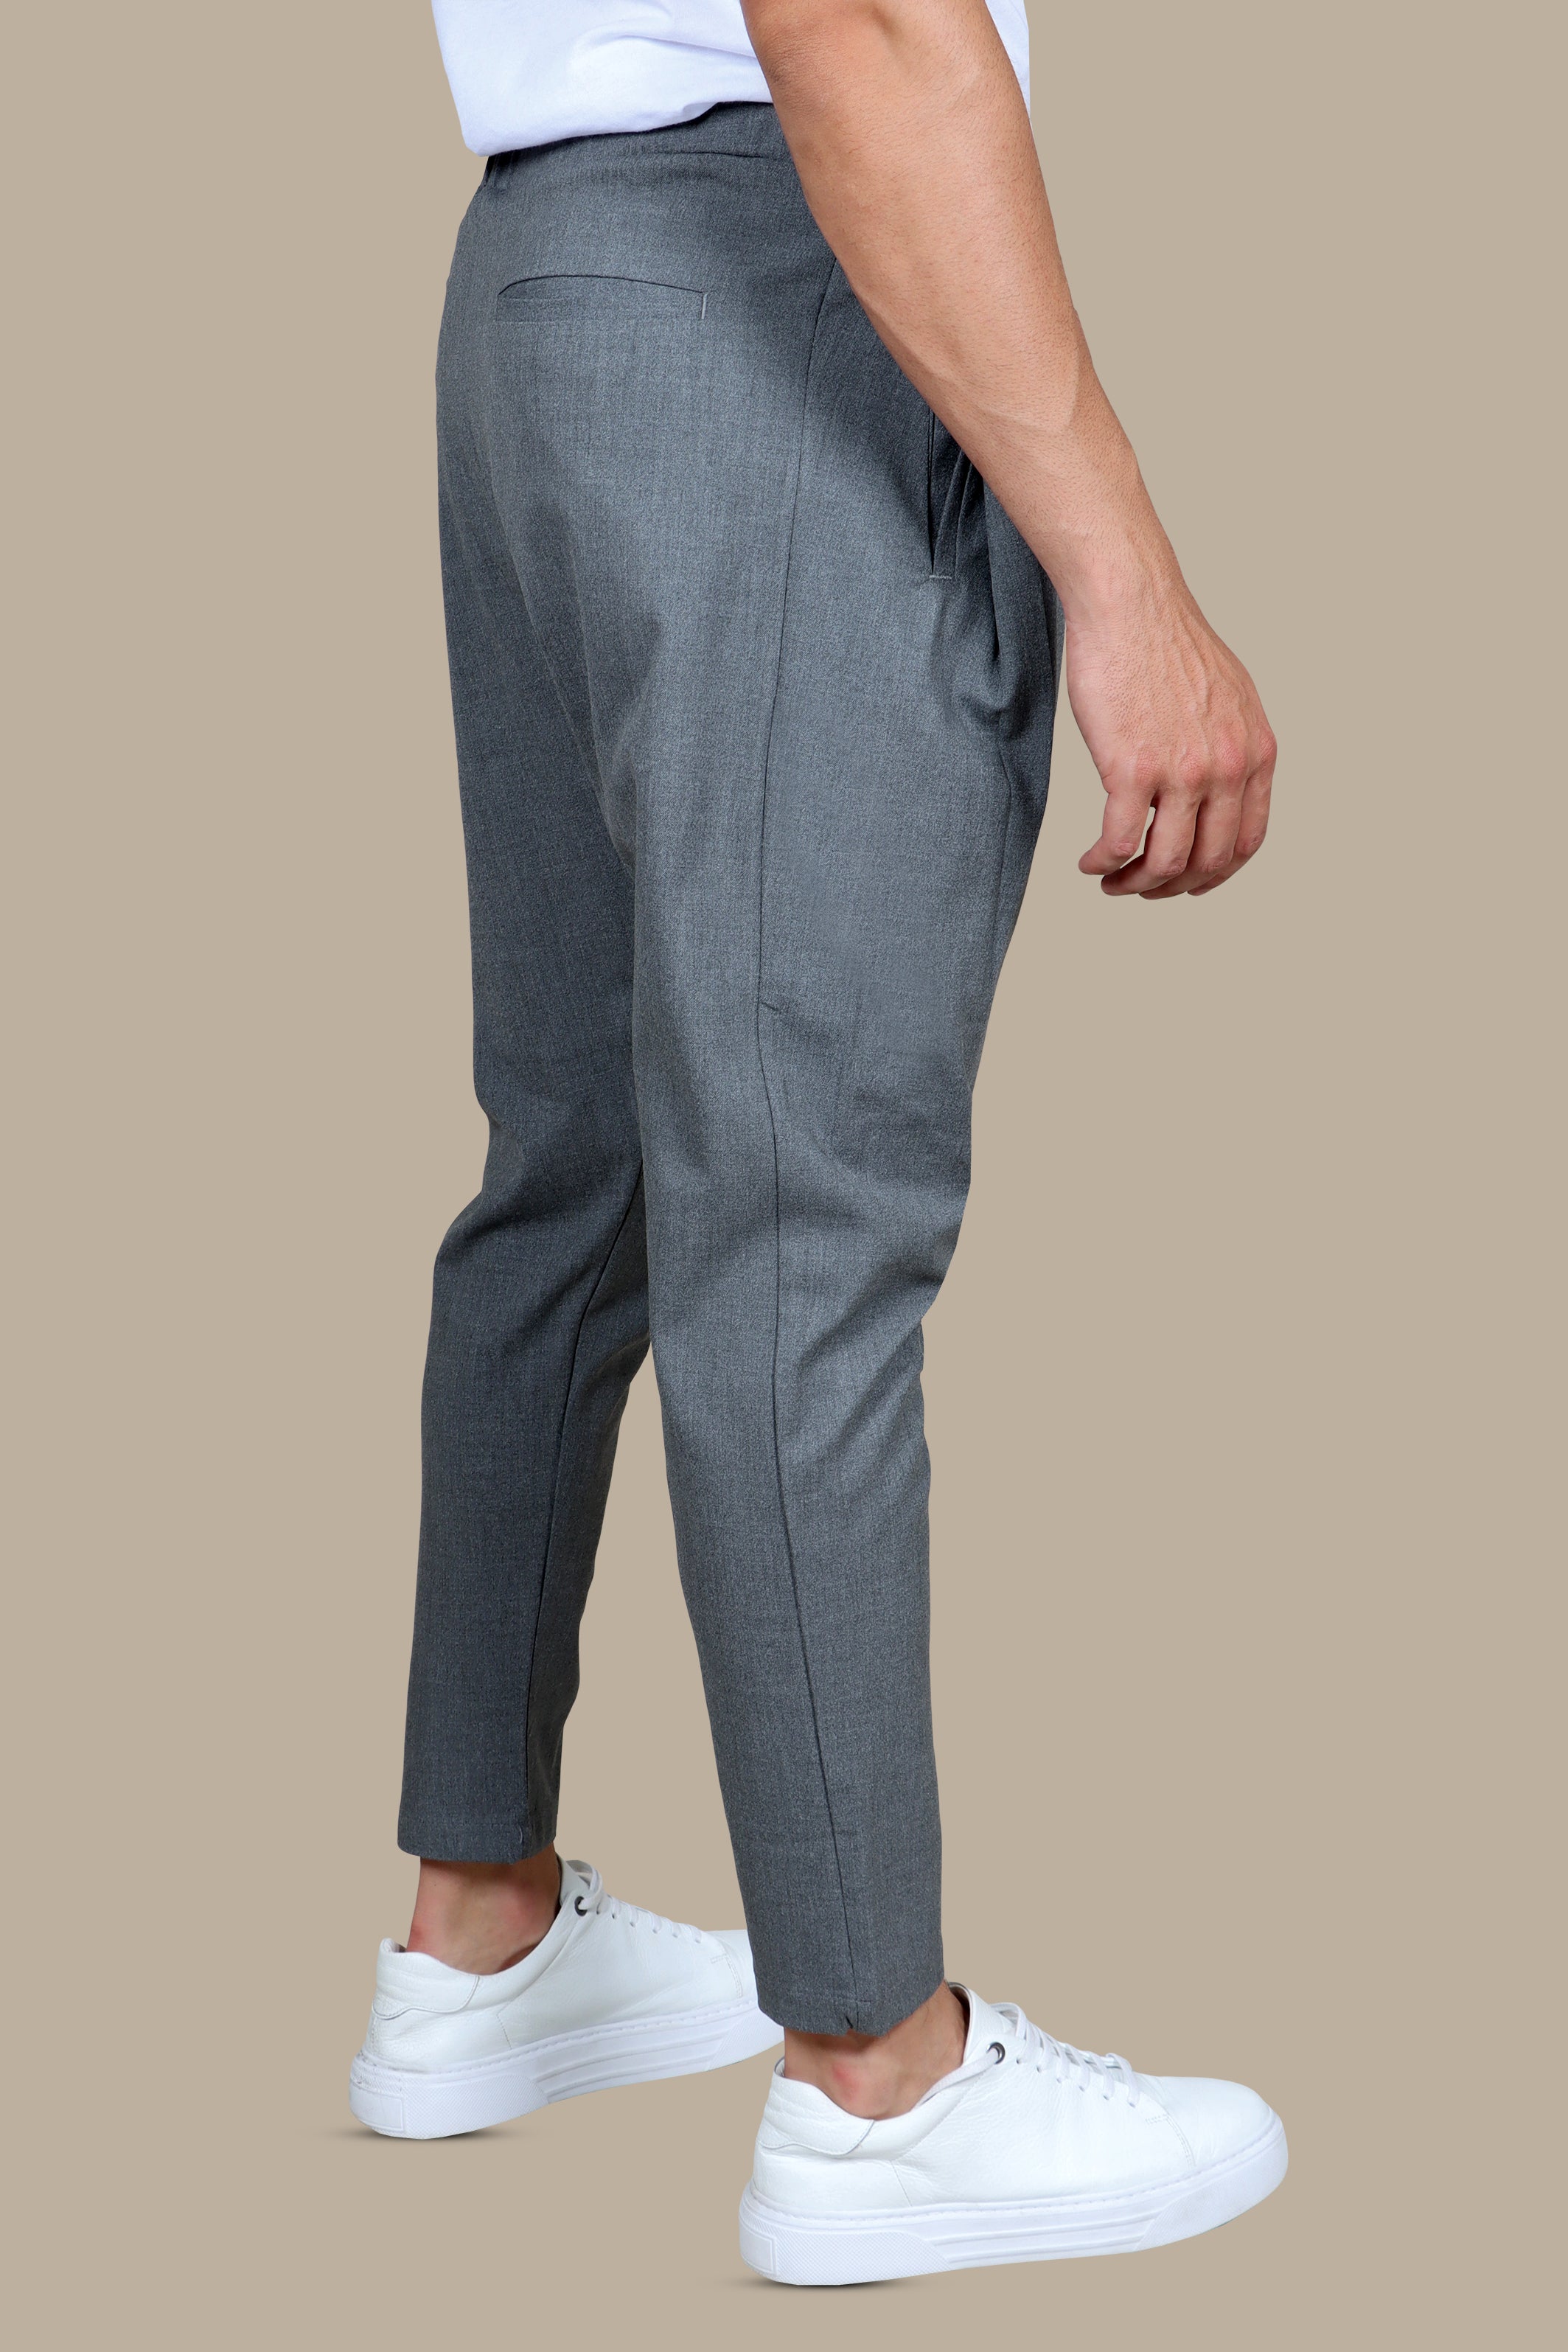 Chic Dark Grey Buggy Trousers: Fashion-Forward and Comfortable